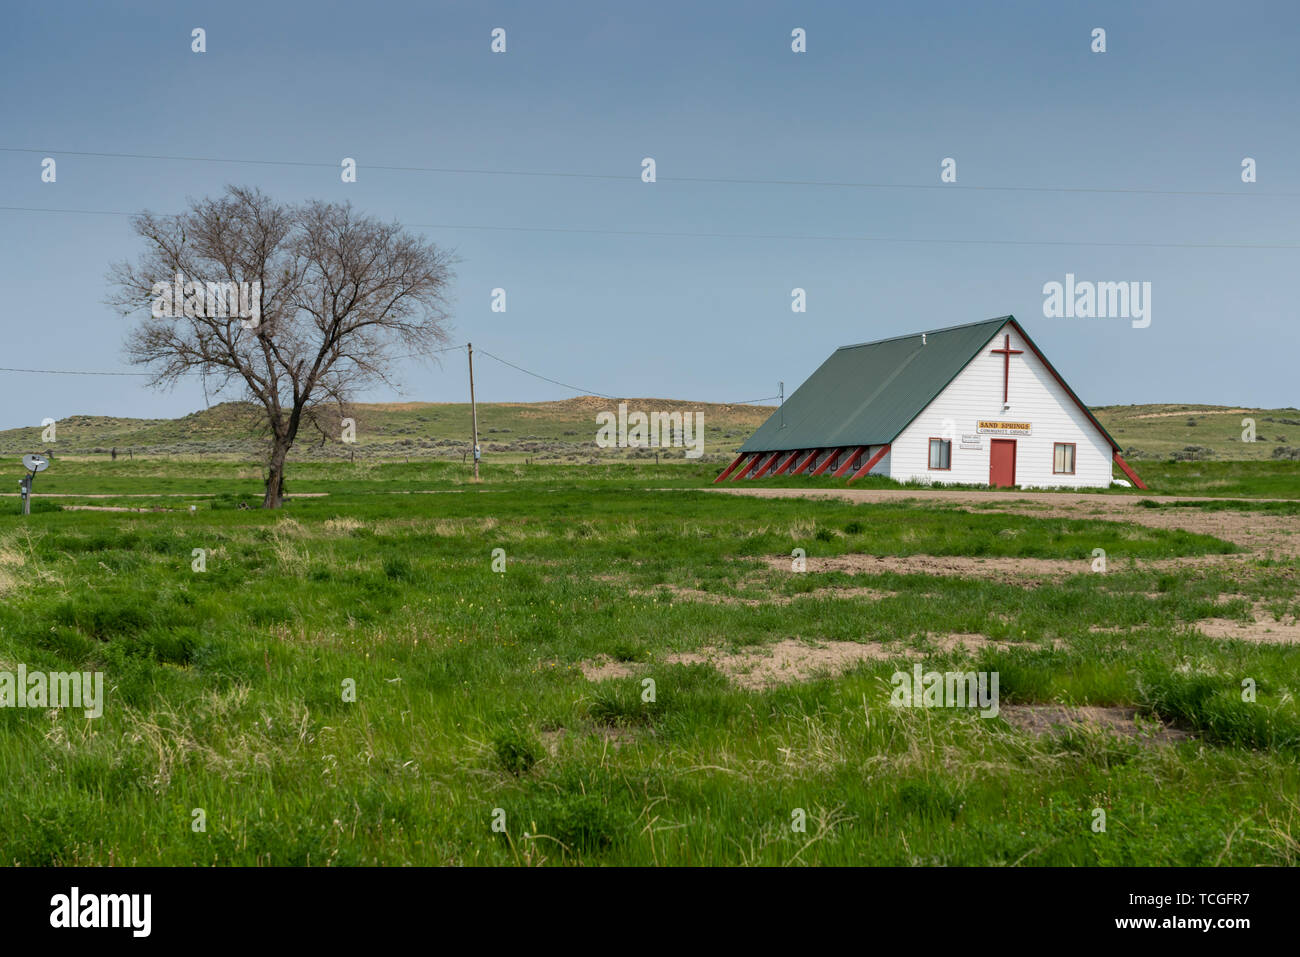 The Sand Springs Community Church in Sand Springs, rural Montana, USA, America. Stock Photo